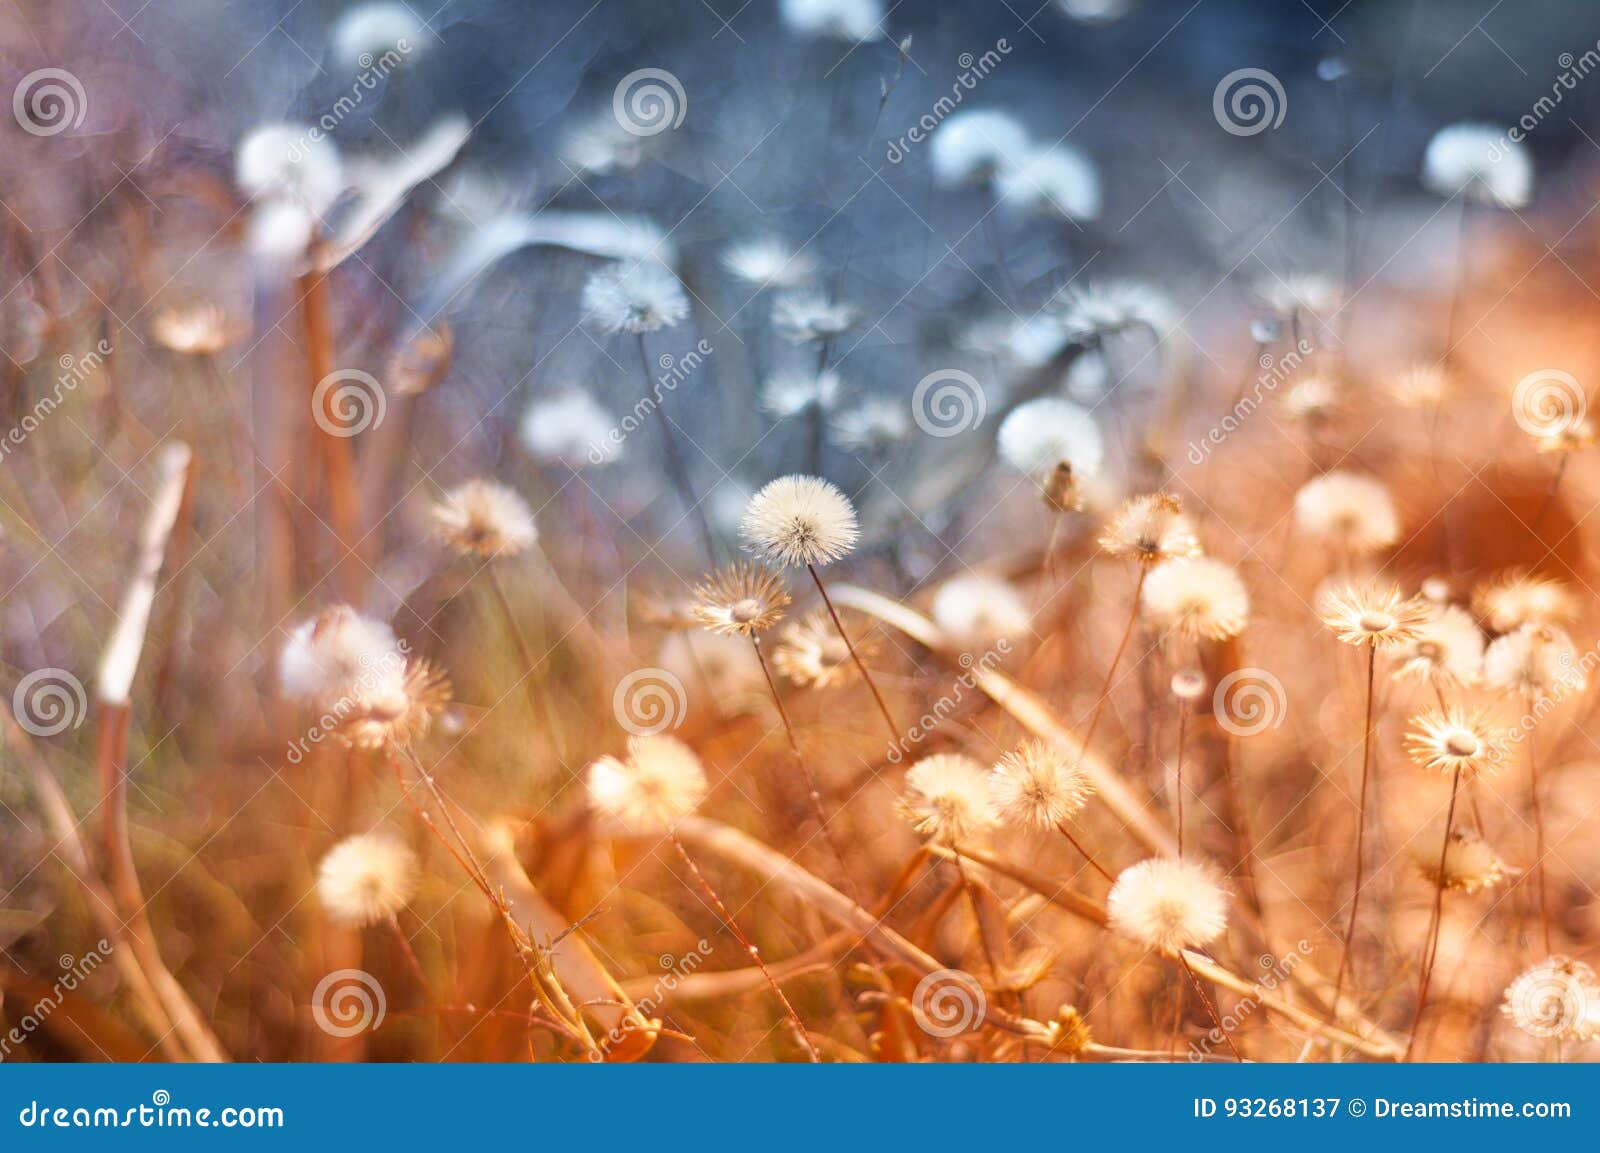 dandelions in spring and colors